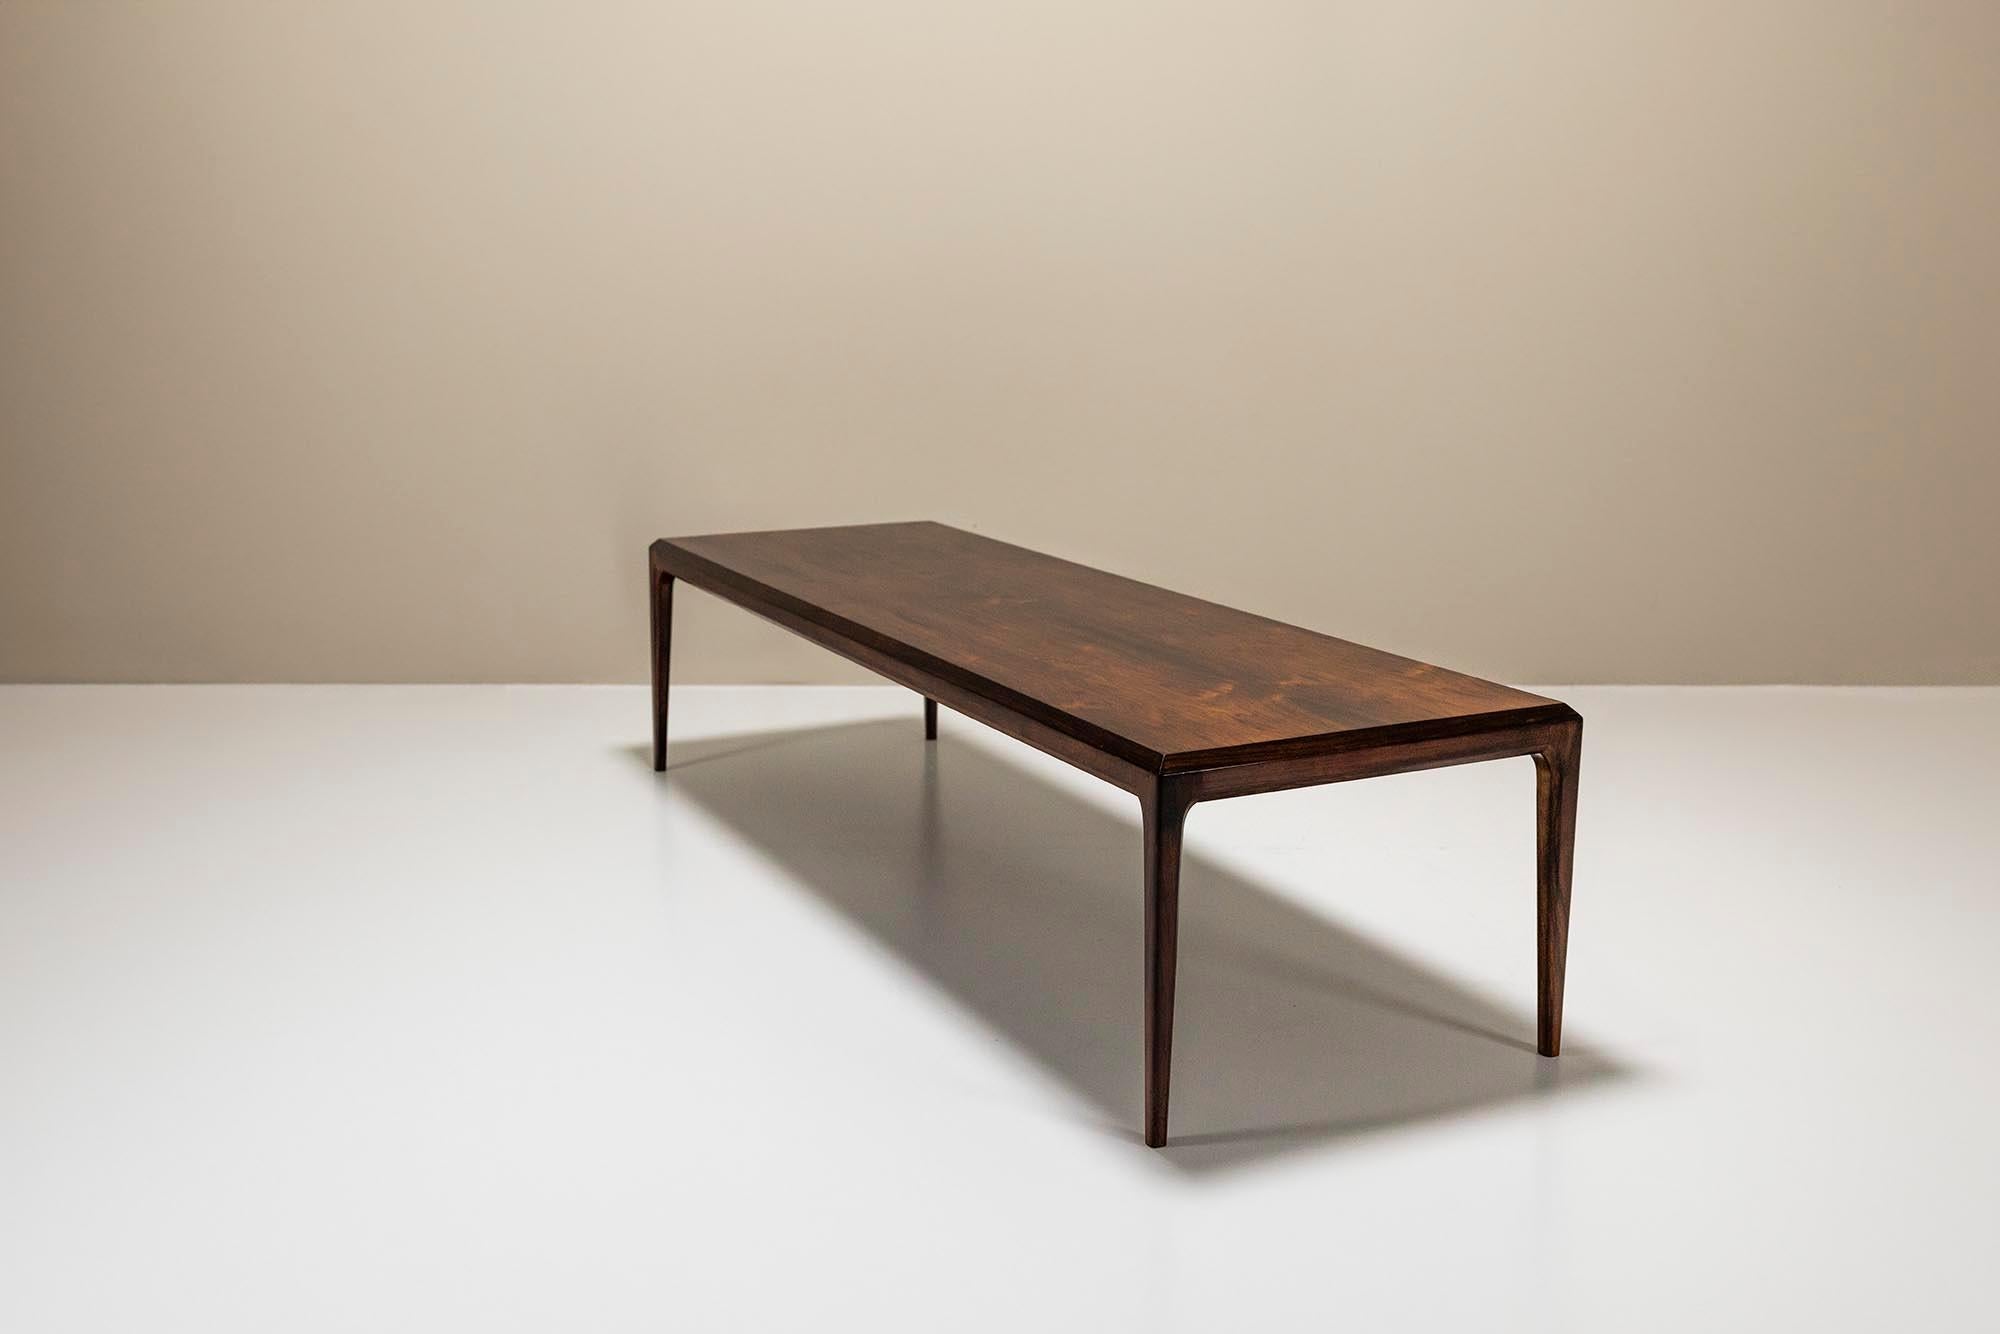 This coffee table produced in the 1960s for Silkeborg Møbelfabrik is a lovely piece of design and craftsmanship. Made from beautiful rosewood, the table features a dramatic drawing and an extremely warm patina that exudes elegance and